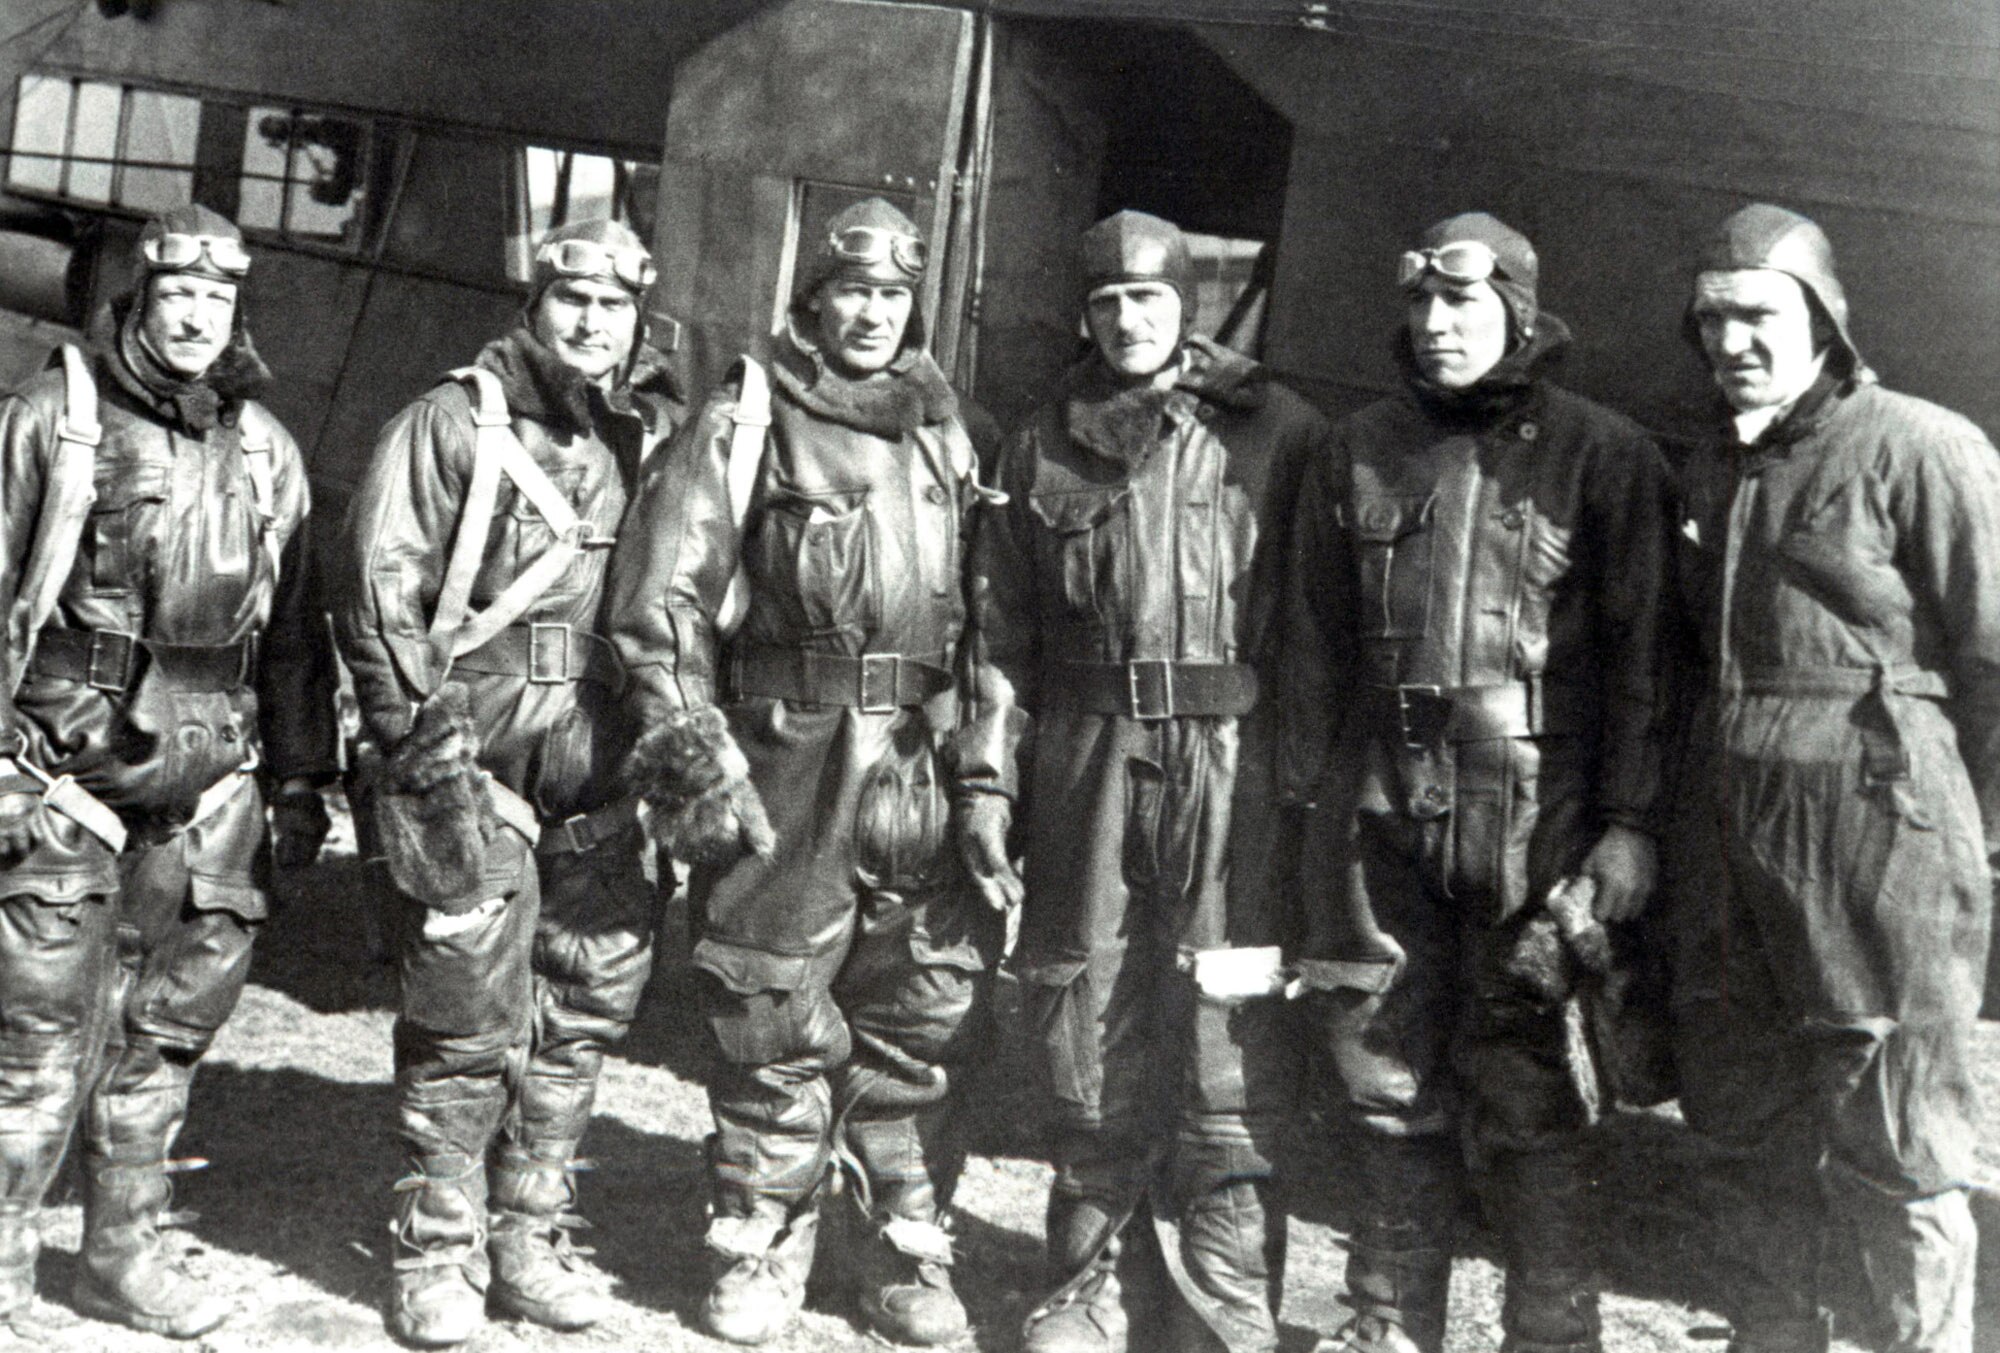 Pictured is the crew of the "Question Mark," including, from left to right, Lieutenant Harry Halvorsen, Capt. Ira Eaker, Staff Sgt. Roy Hooe, Maj. Carl Spaatz (mission commander), Lt. Elwood "Pete" Quesada, and an unidentified crewmember. During a 1929 refueling operation dubbed "Question Mark," a Fokker C-2A was refueled in flight by two modified Douglas C-1 transport aircraft.   (Courtesy photo)
